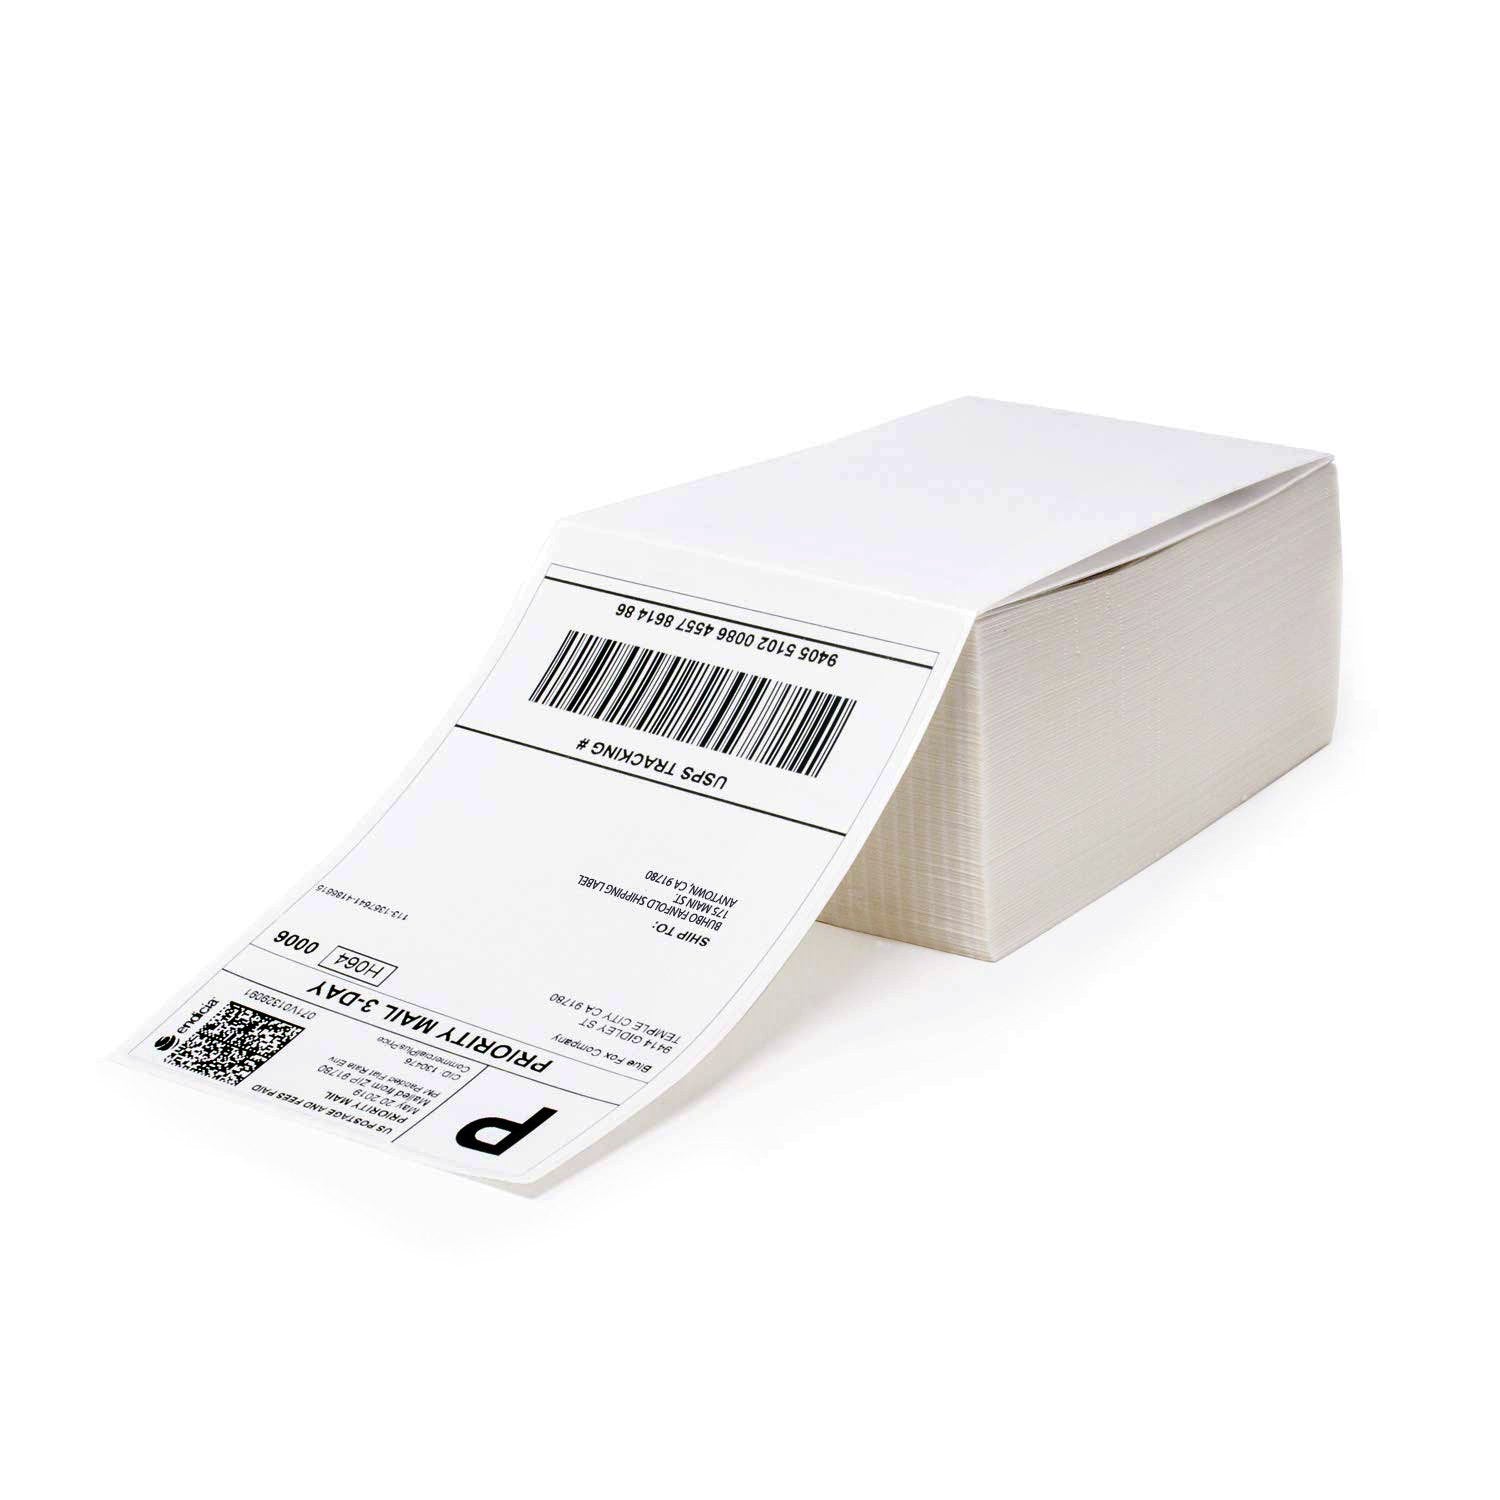 BESTEASY Thermal Labels, Fanfold Labels, Commercial Grade Shipping Labels for Direct Thermal Printer